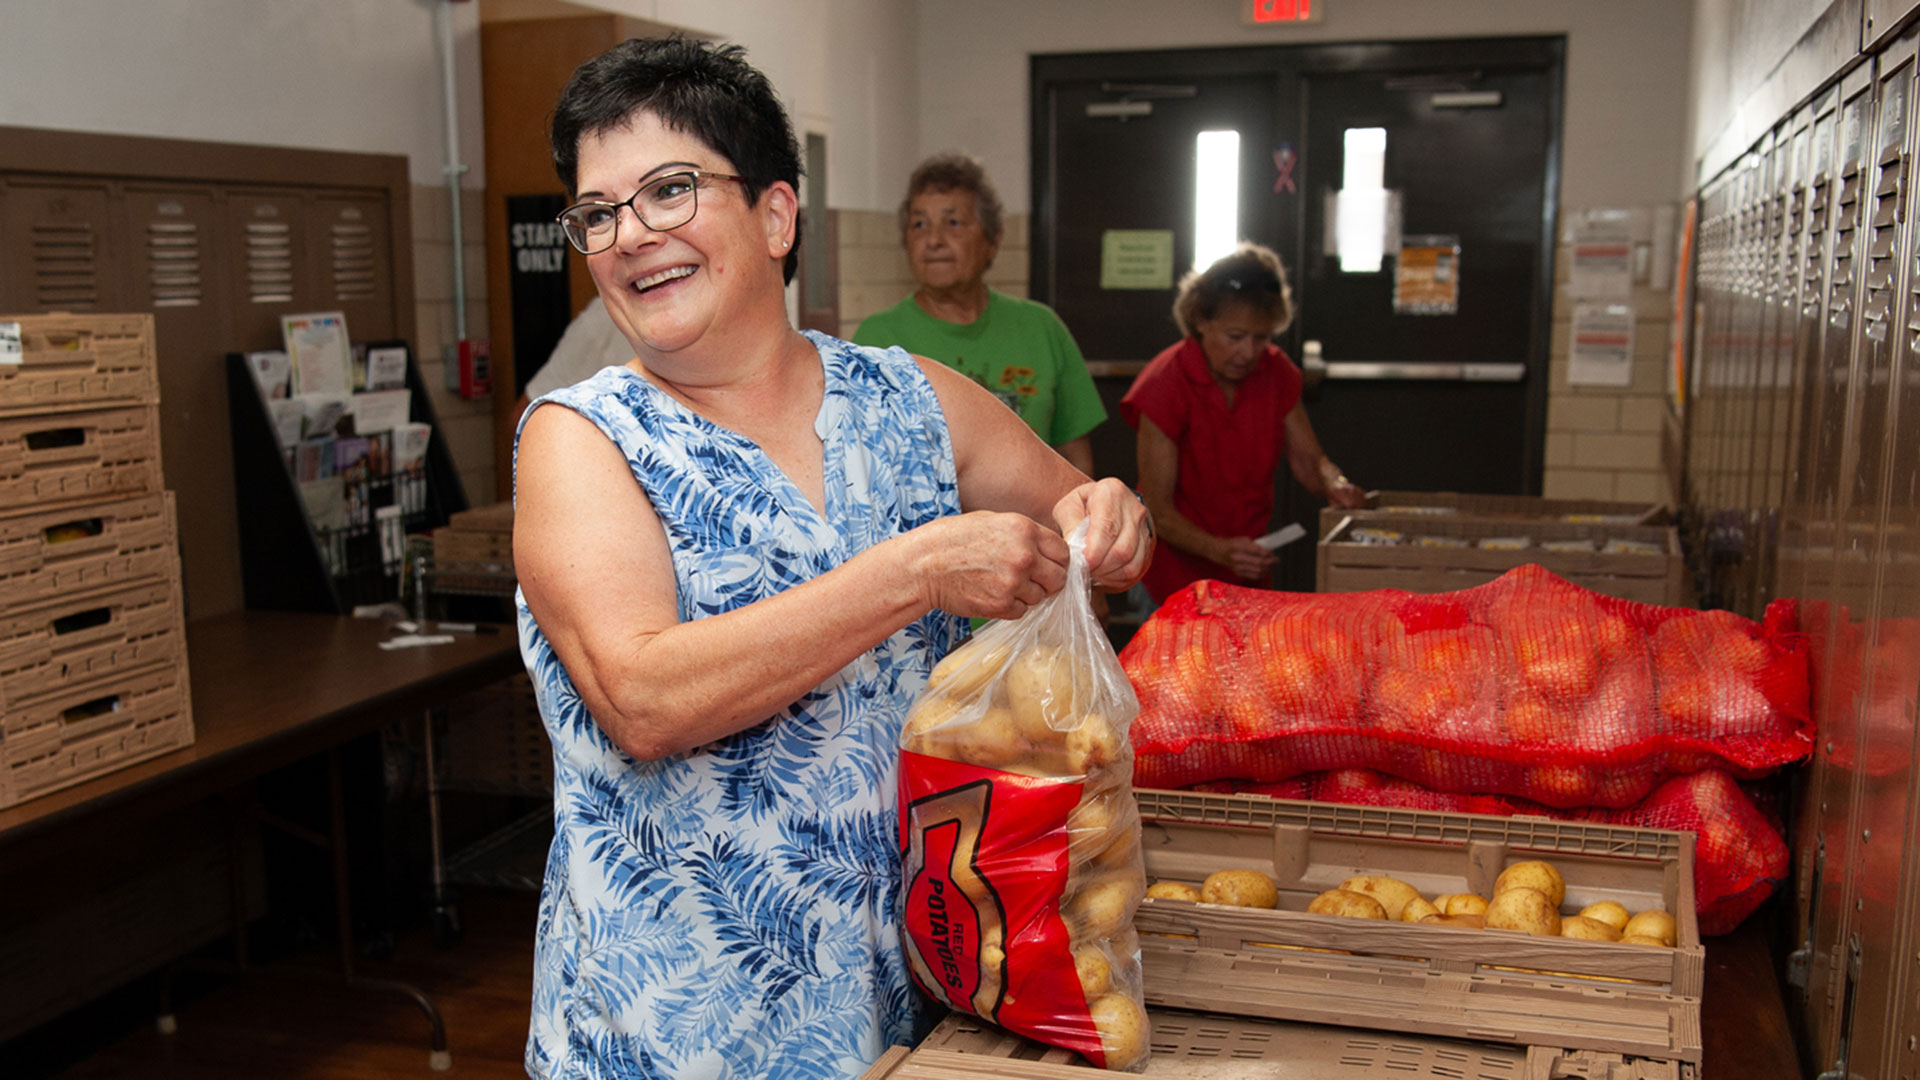 A volunteer opens a bag of potatoes at Helping Hands Food Pantry in Roseville.